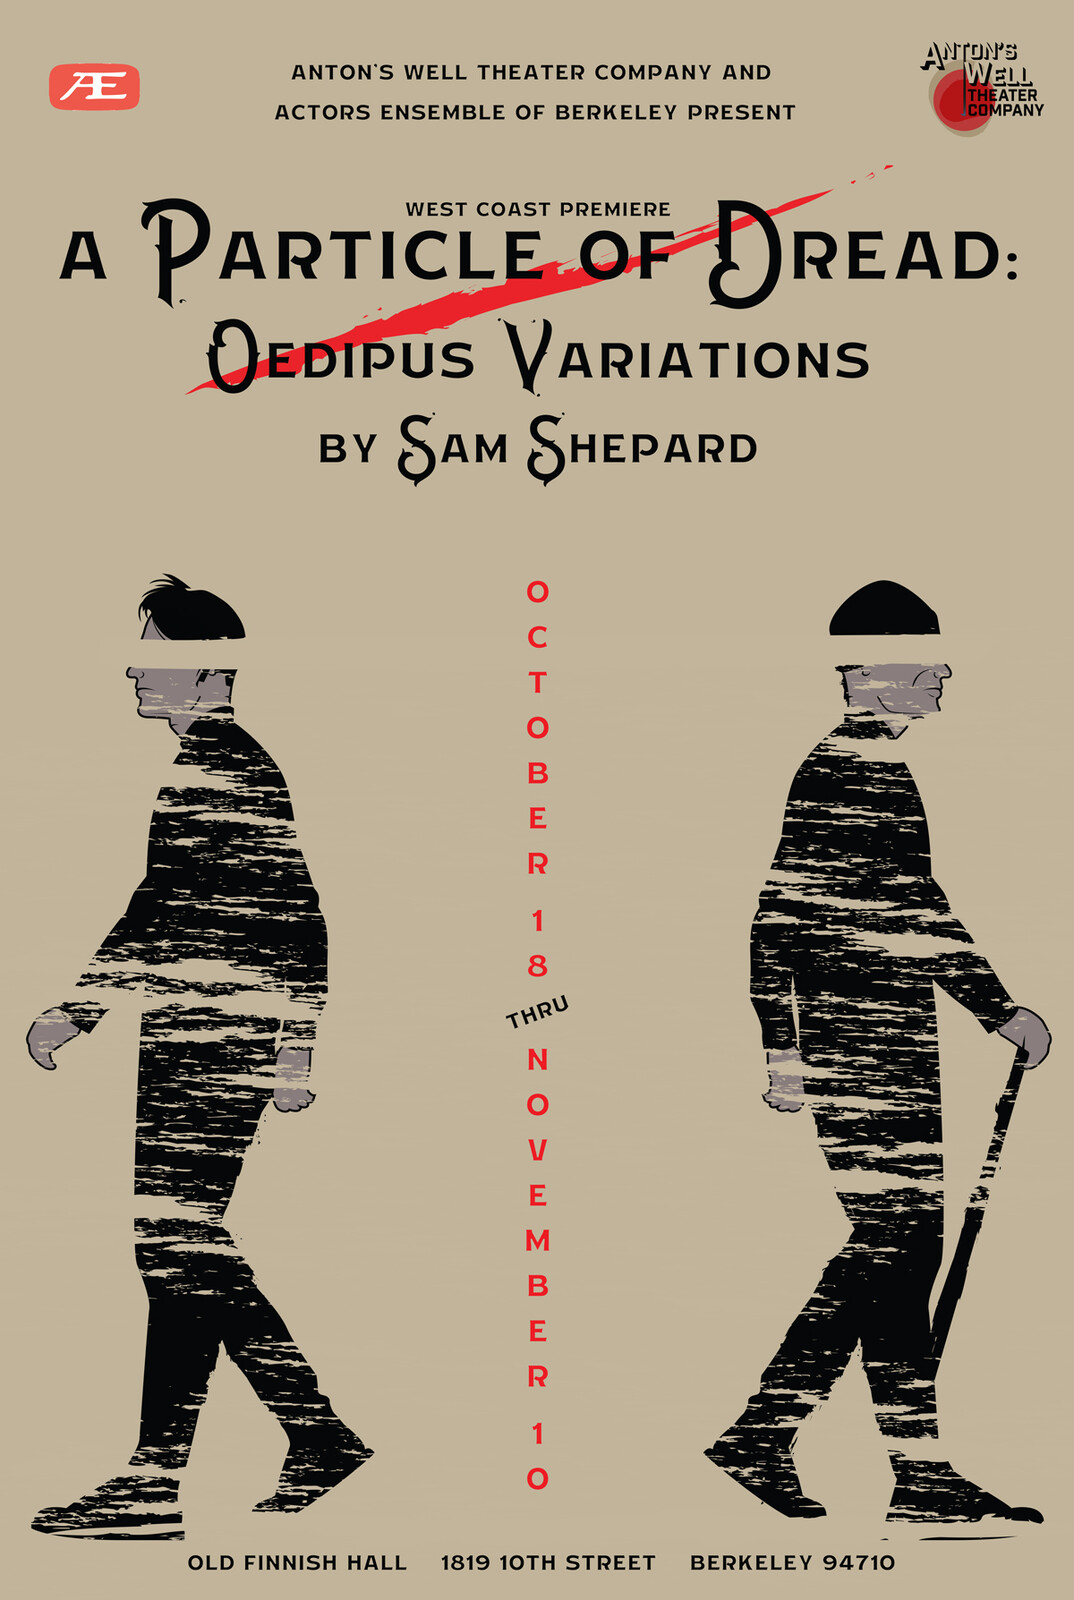 A Particle of Dread: Oedipus Variations